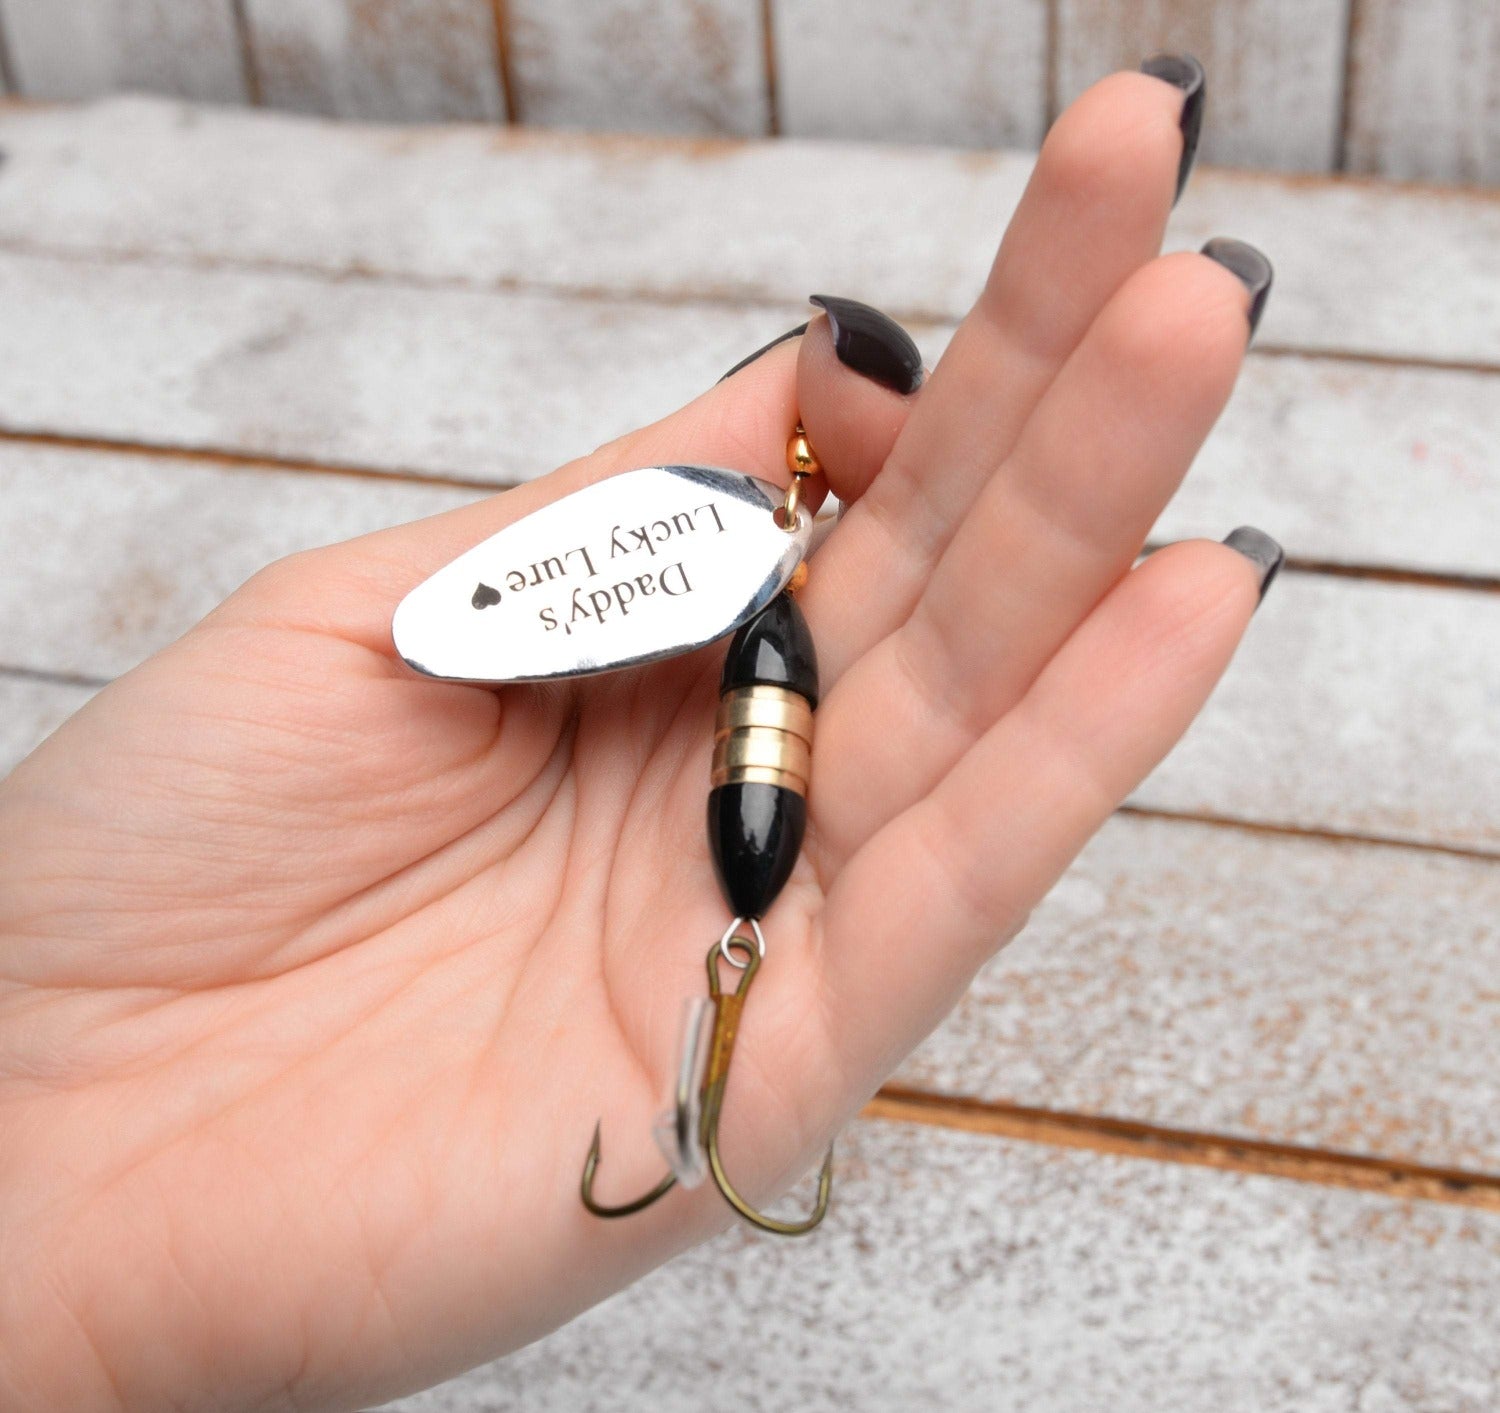 Custom Painted Personalized Retirement Fishing Lure Gift Fishing Gifts for  Men O-fish-ally Retired Fishermen Gifts Fishing Lure 